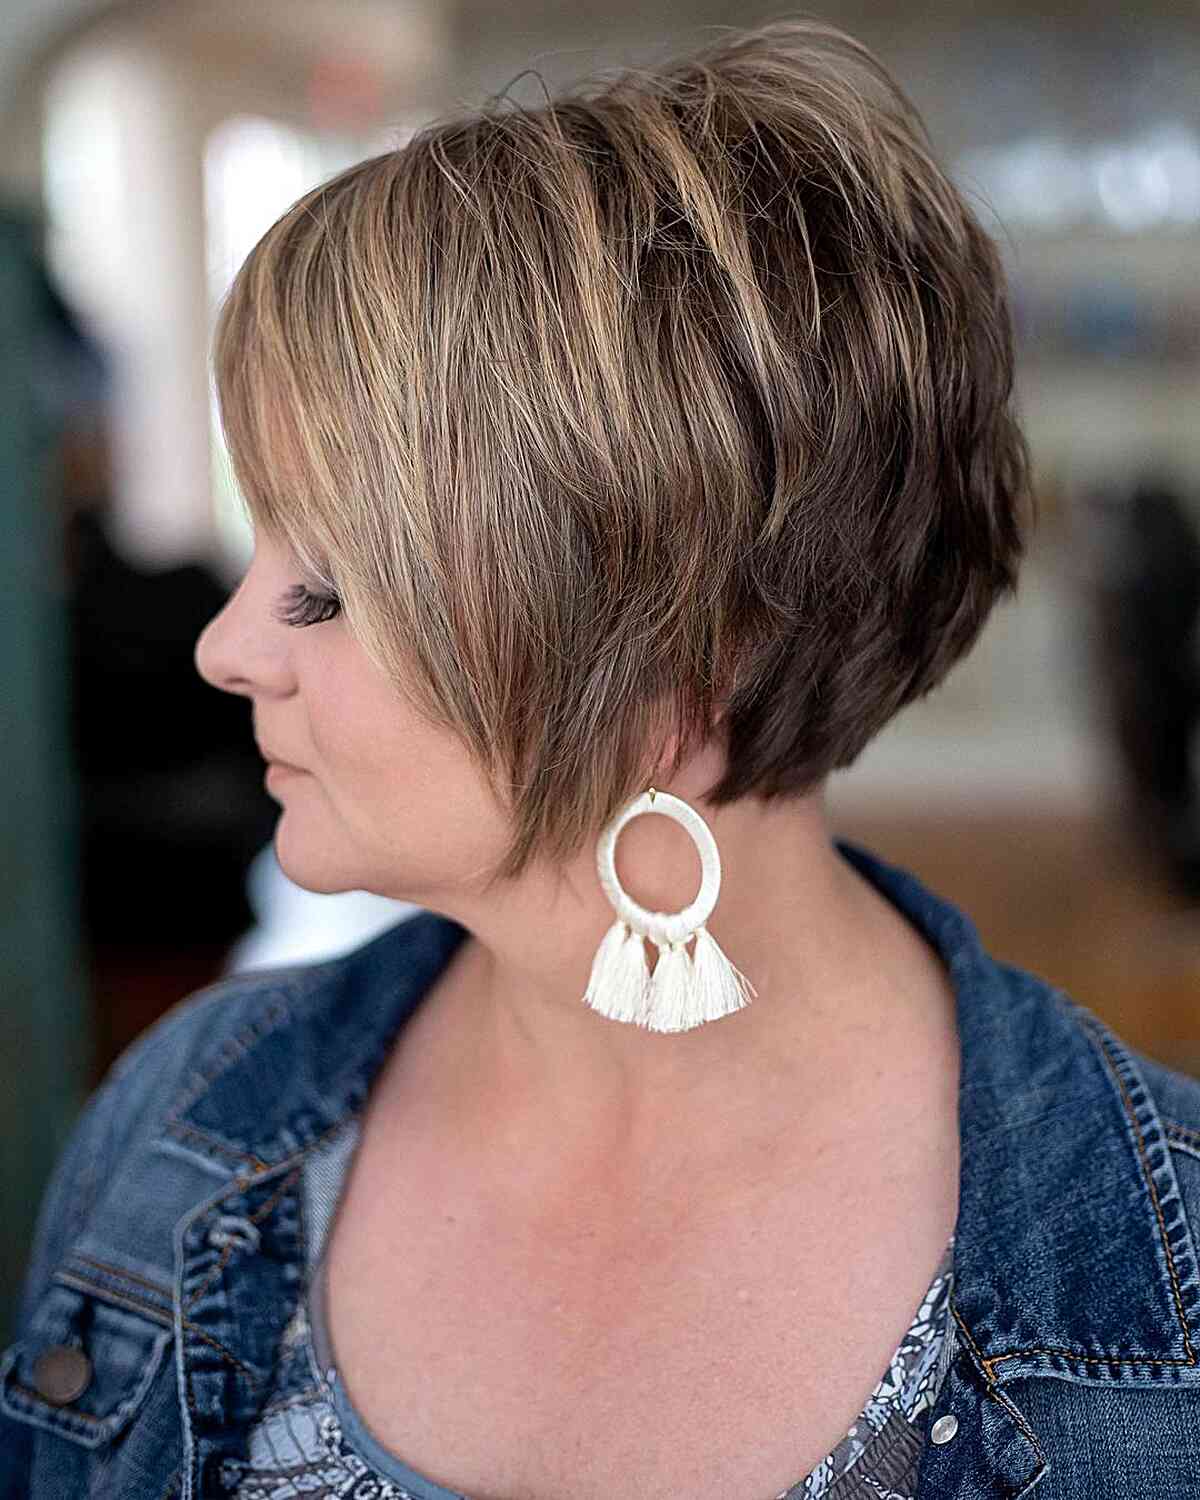 Super Short Wedge Cut with Choppy Layers on Older Women Aged 40